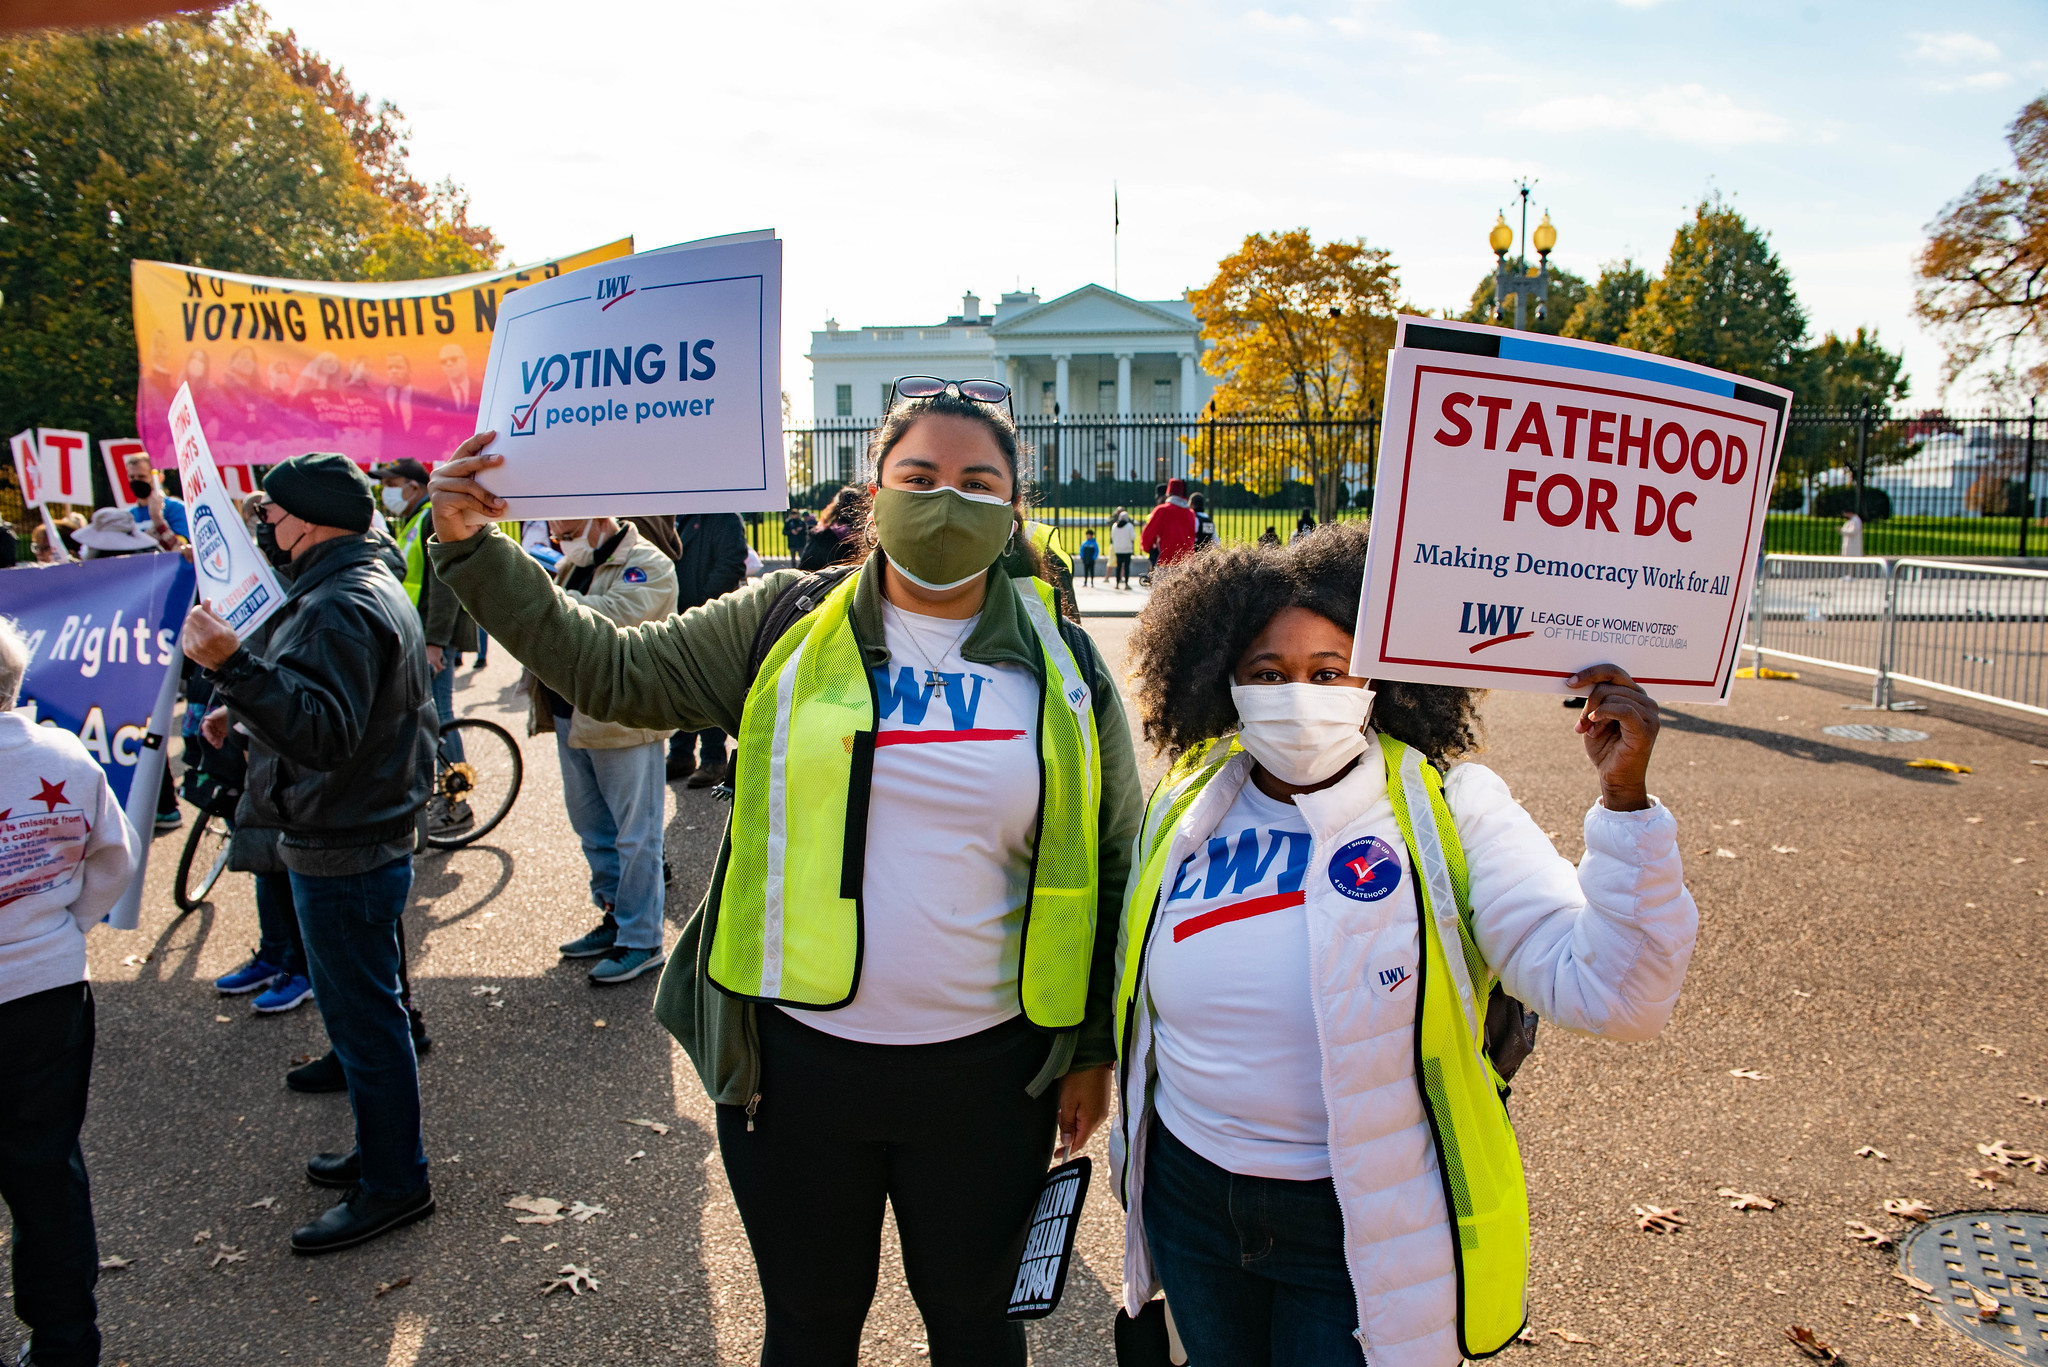 Two LWVUS staff members at a rally in front of the White House in Washington DC. Both staff members are wearing yellow vest and holding rally signs ("Voting is People Power," "STATEHOOD for DC")